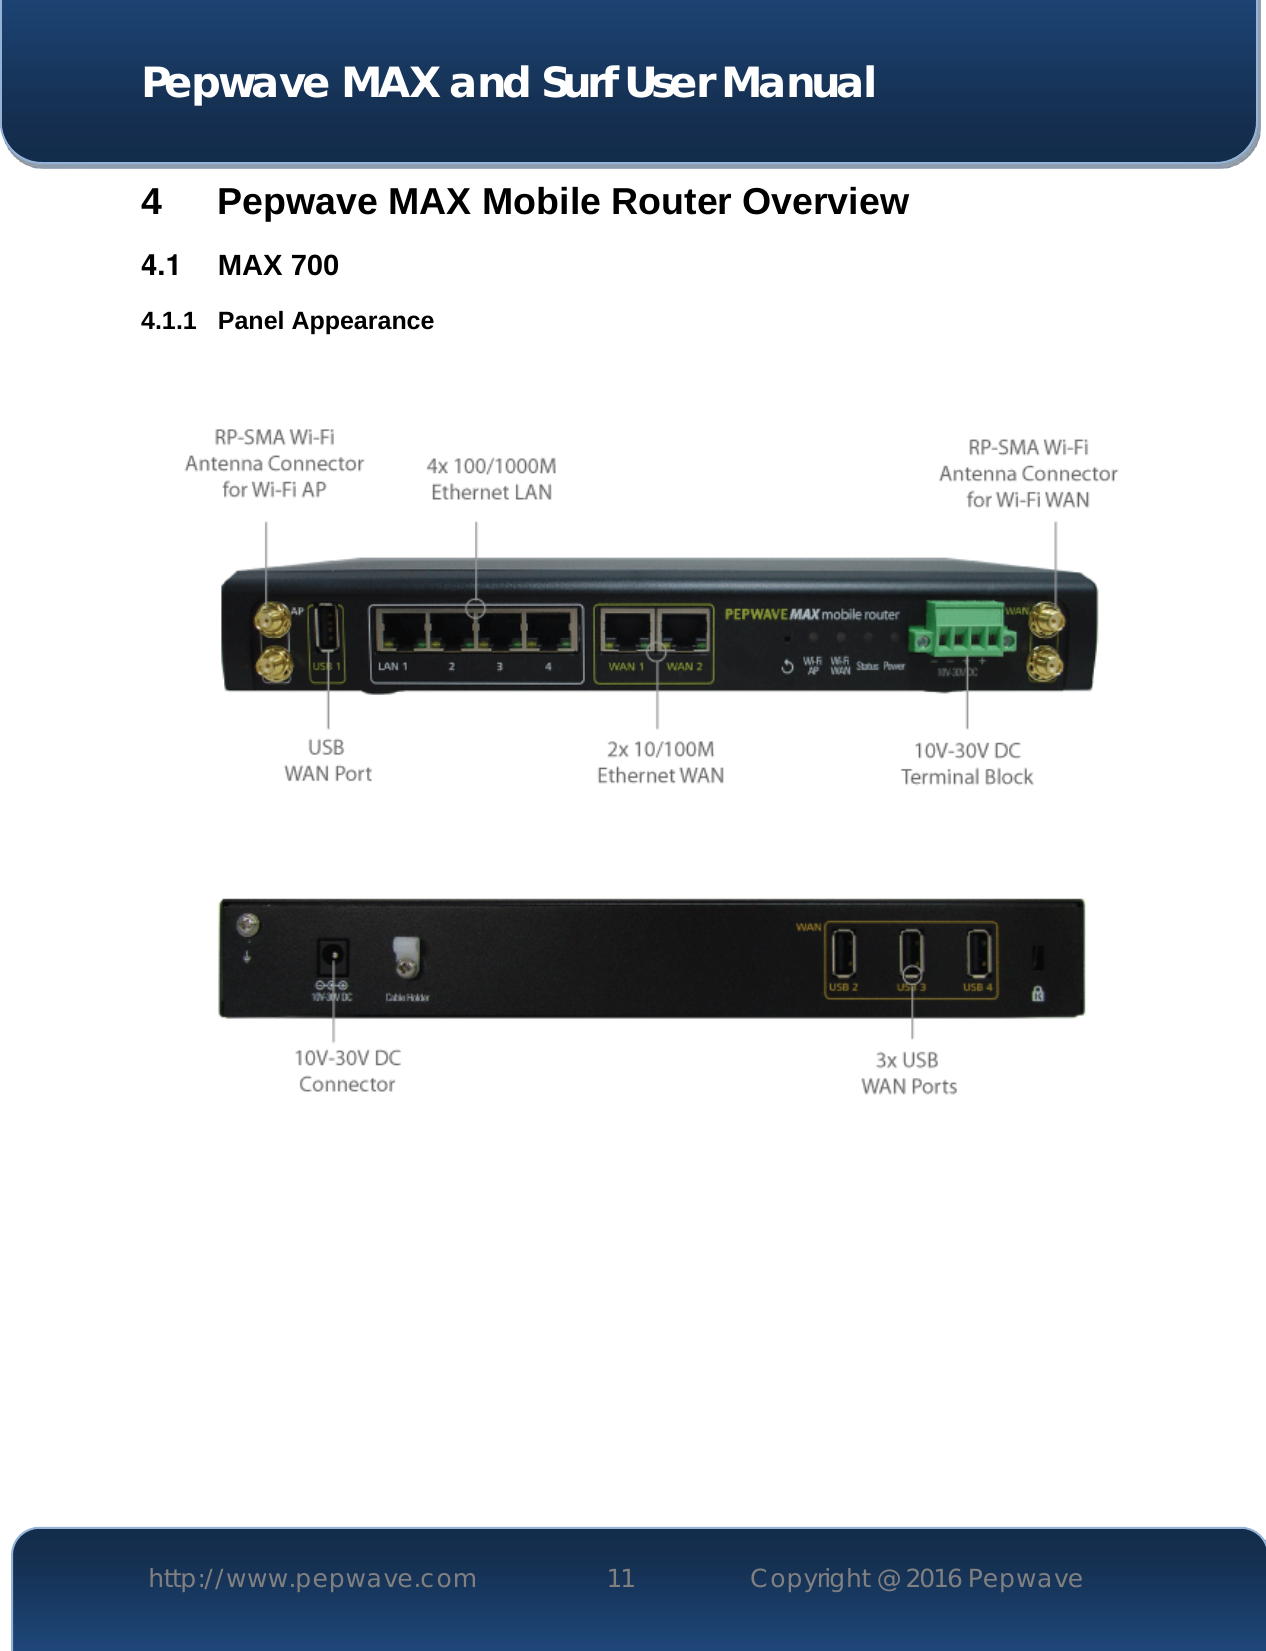  Pepwave MAX and Surf User Manual http://www.pepwave.com 11   Copyright @ 2016 Pepwave   4 Pepwave MAX Mobile Router Overview 4.1  MAX 700 4.1.1 Panel Appearance       